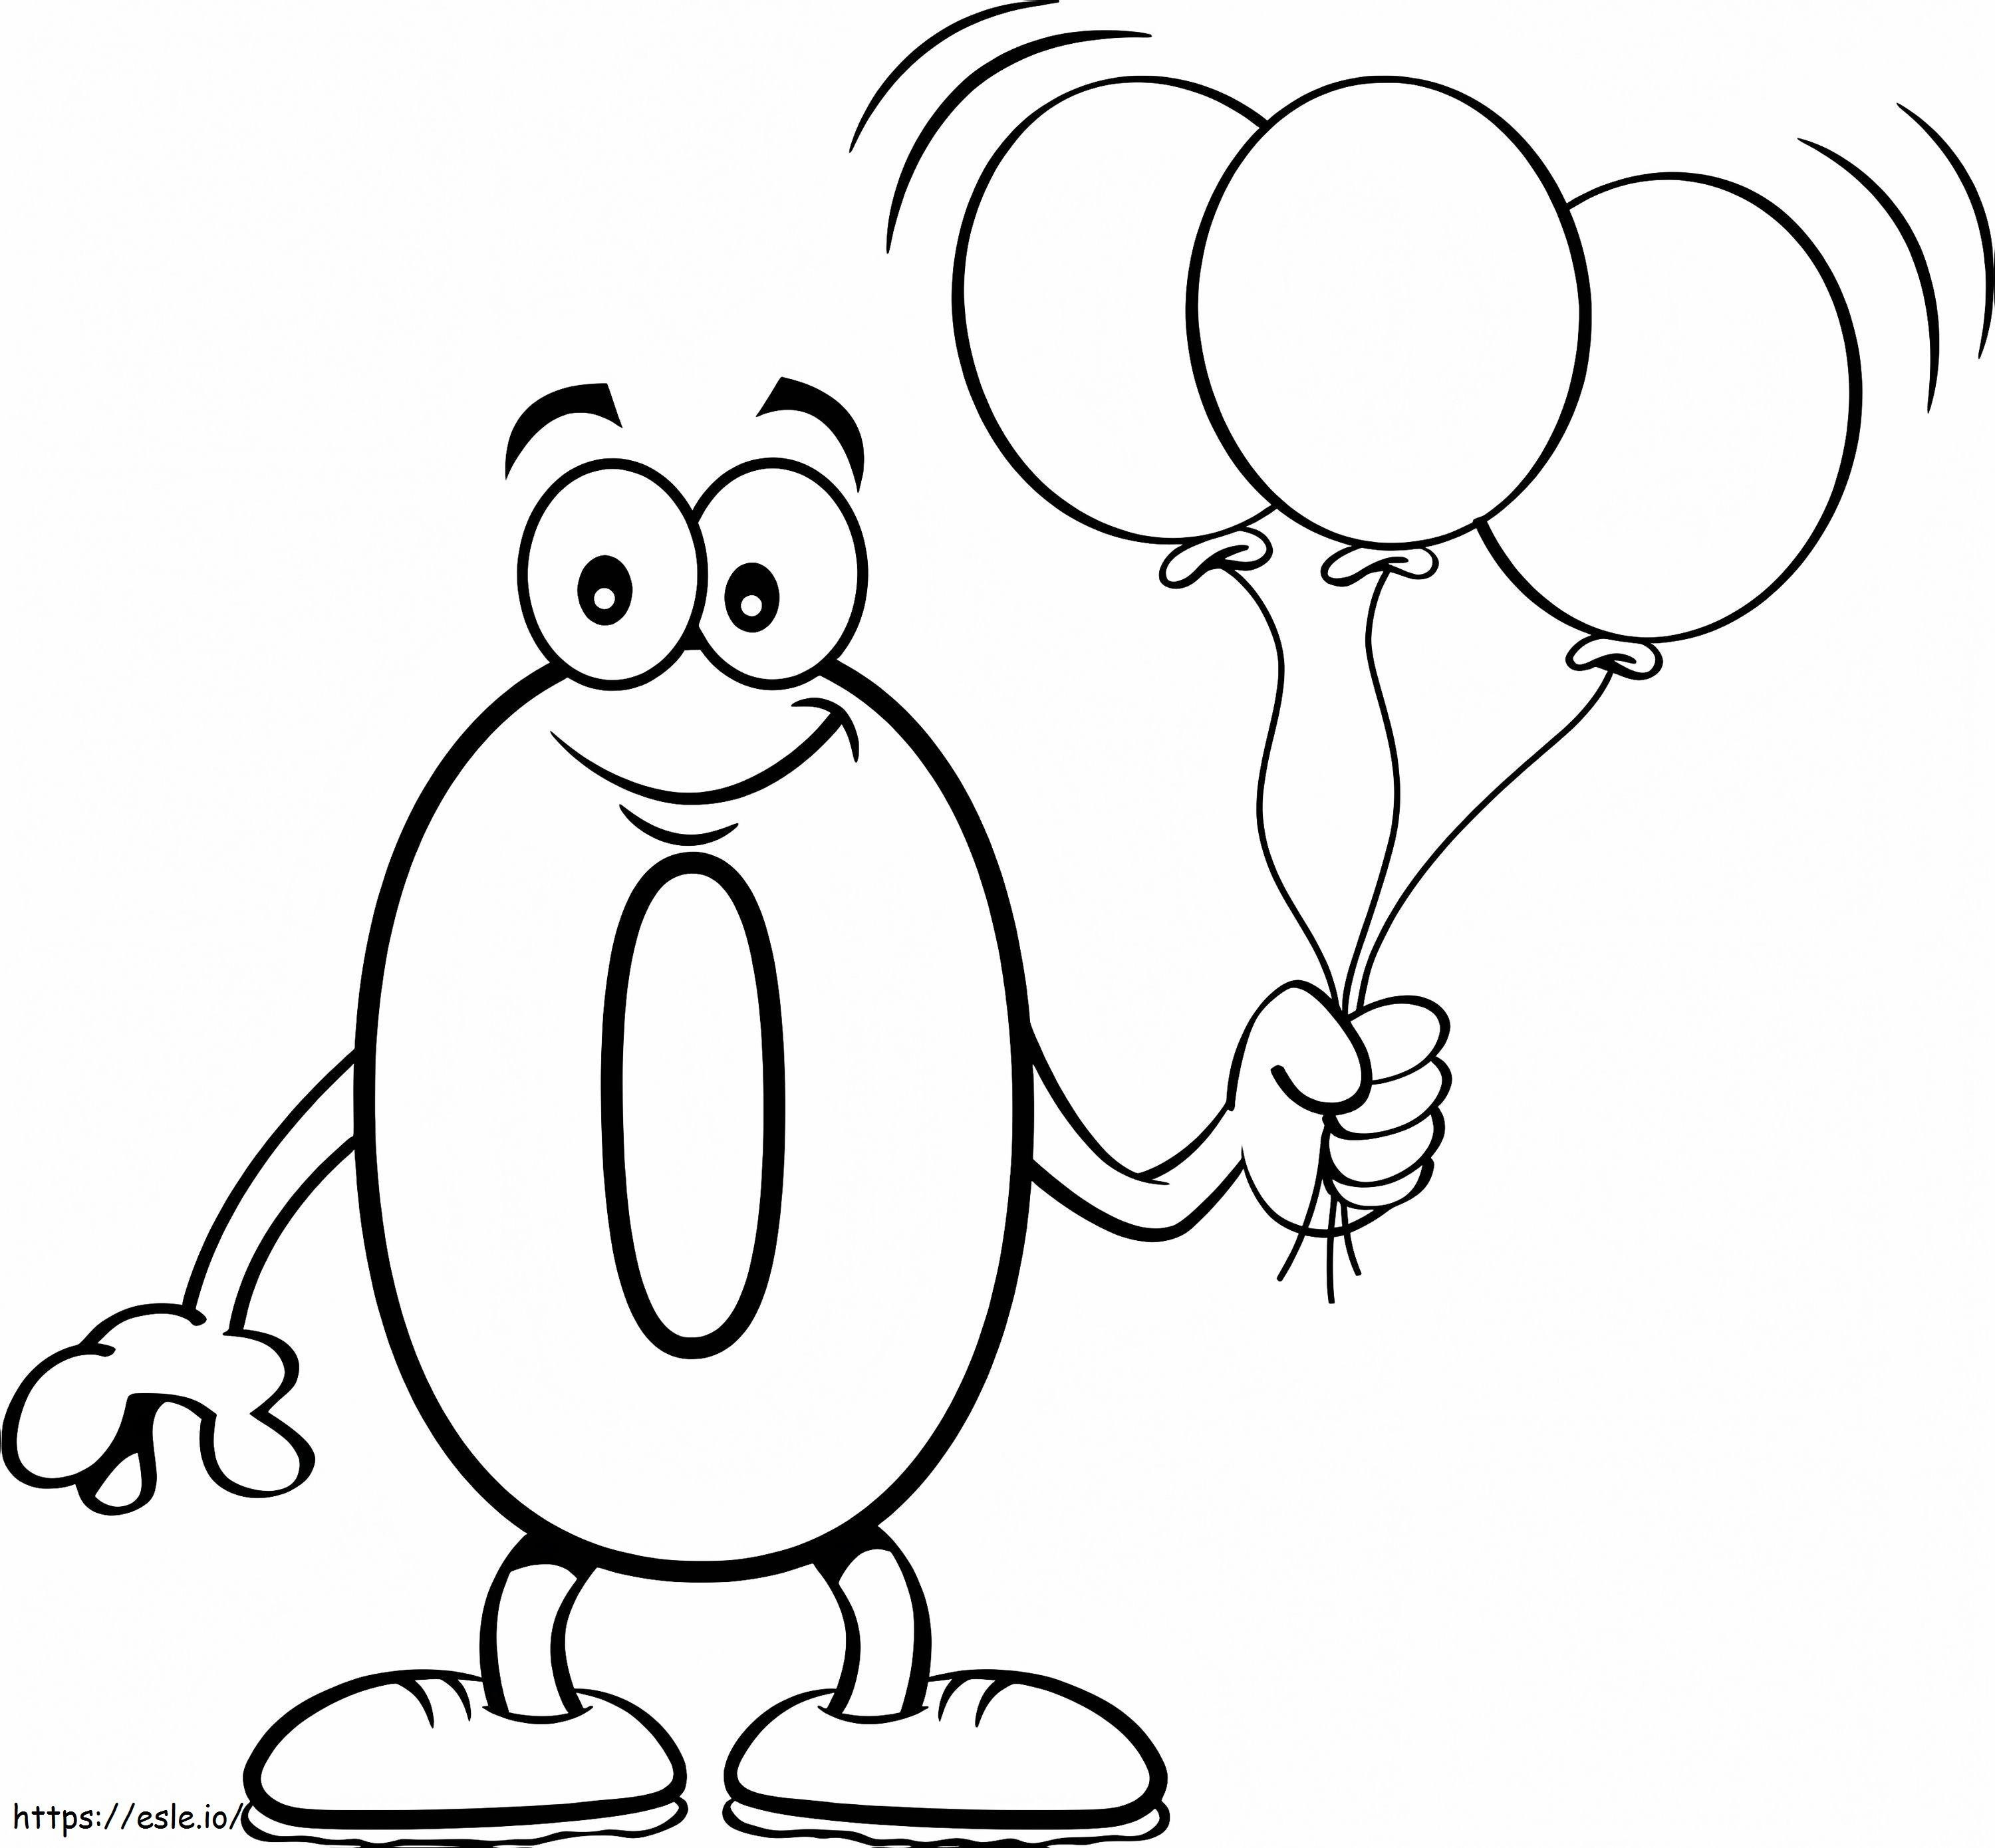 Number 0 And Balloons coloring page